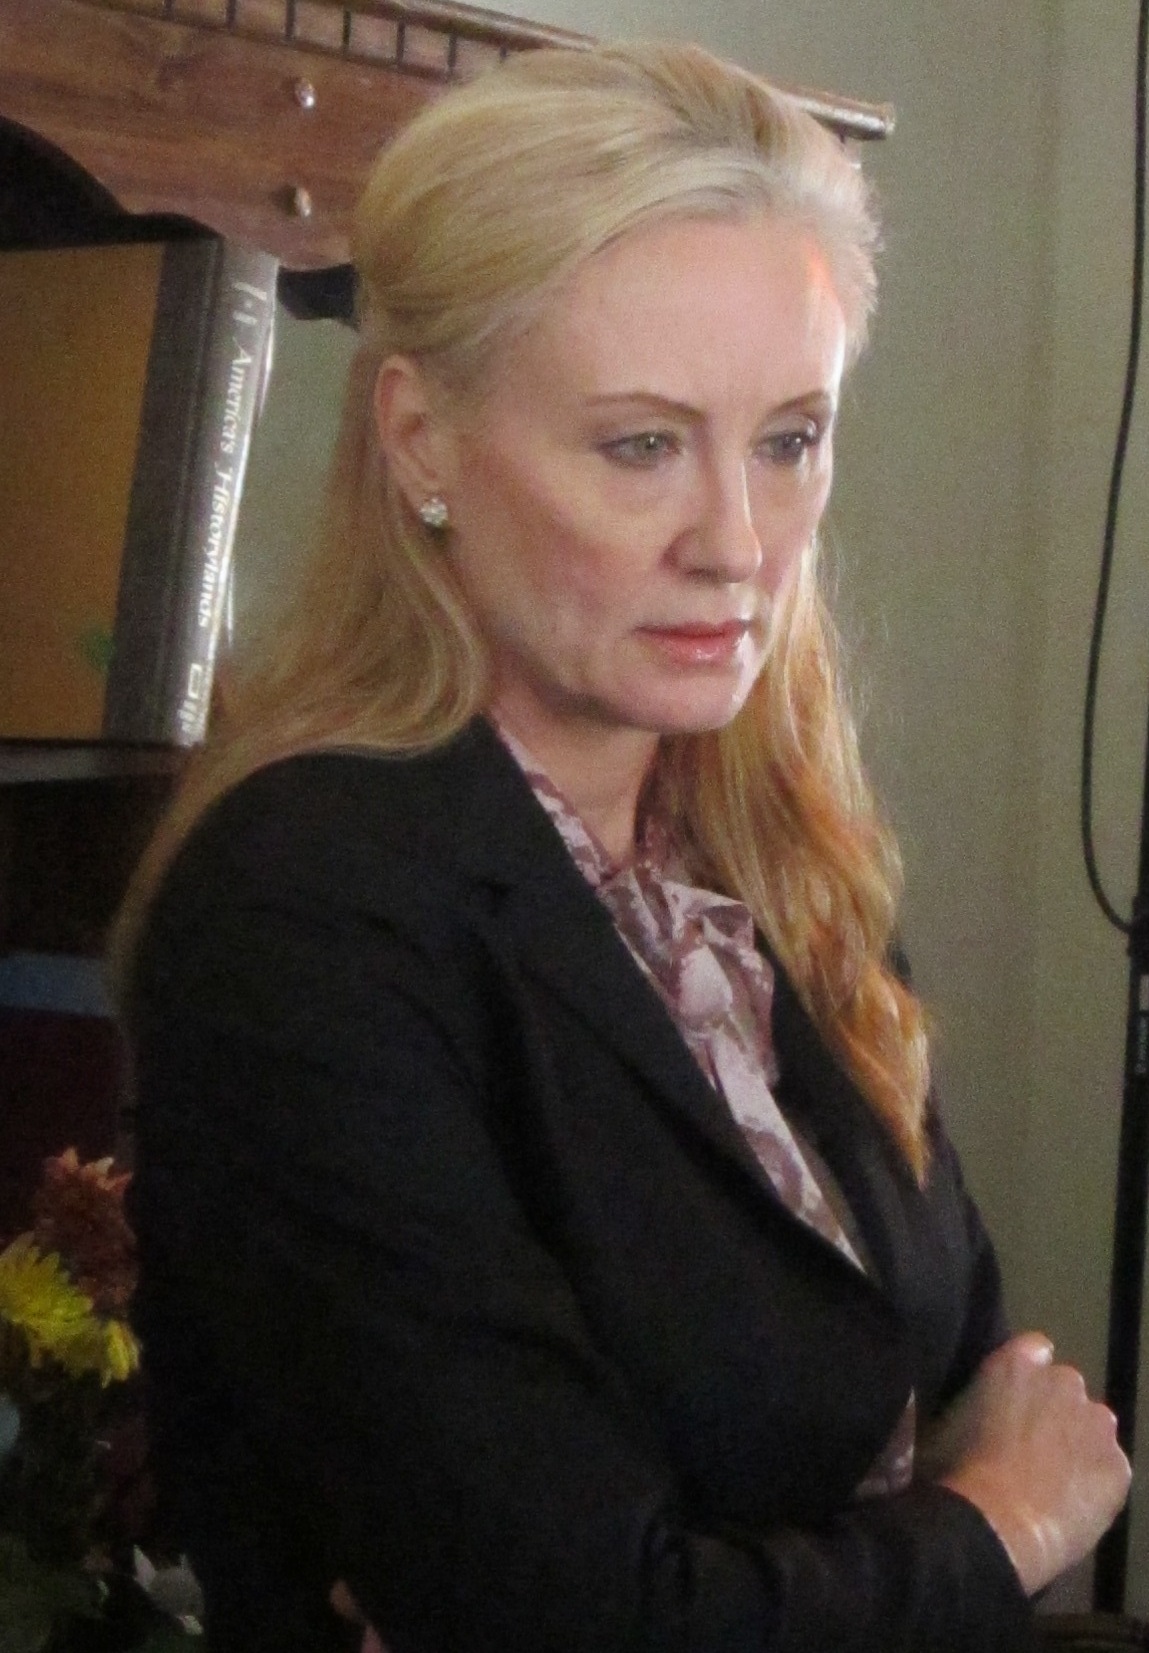 Andrea Anderson, as Linda onset of Heart Decision. Written /Directed by Yana Surits and DP Tigran Mutafyan.